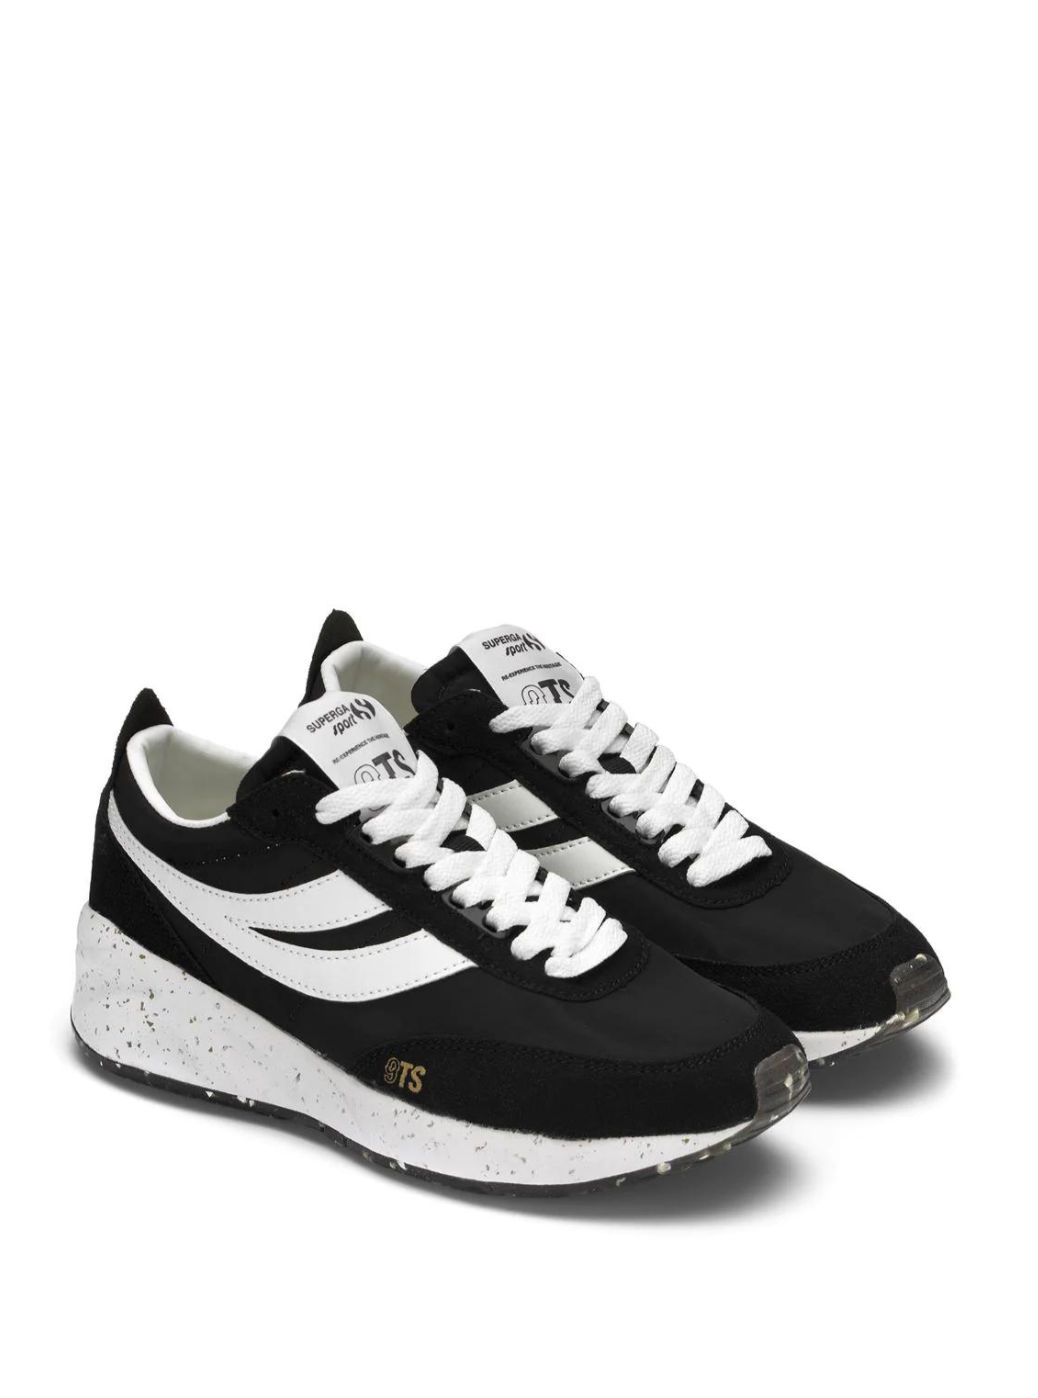 black and white casual sneaker